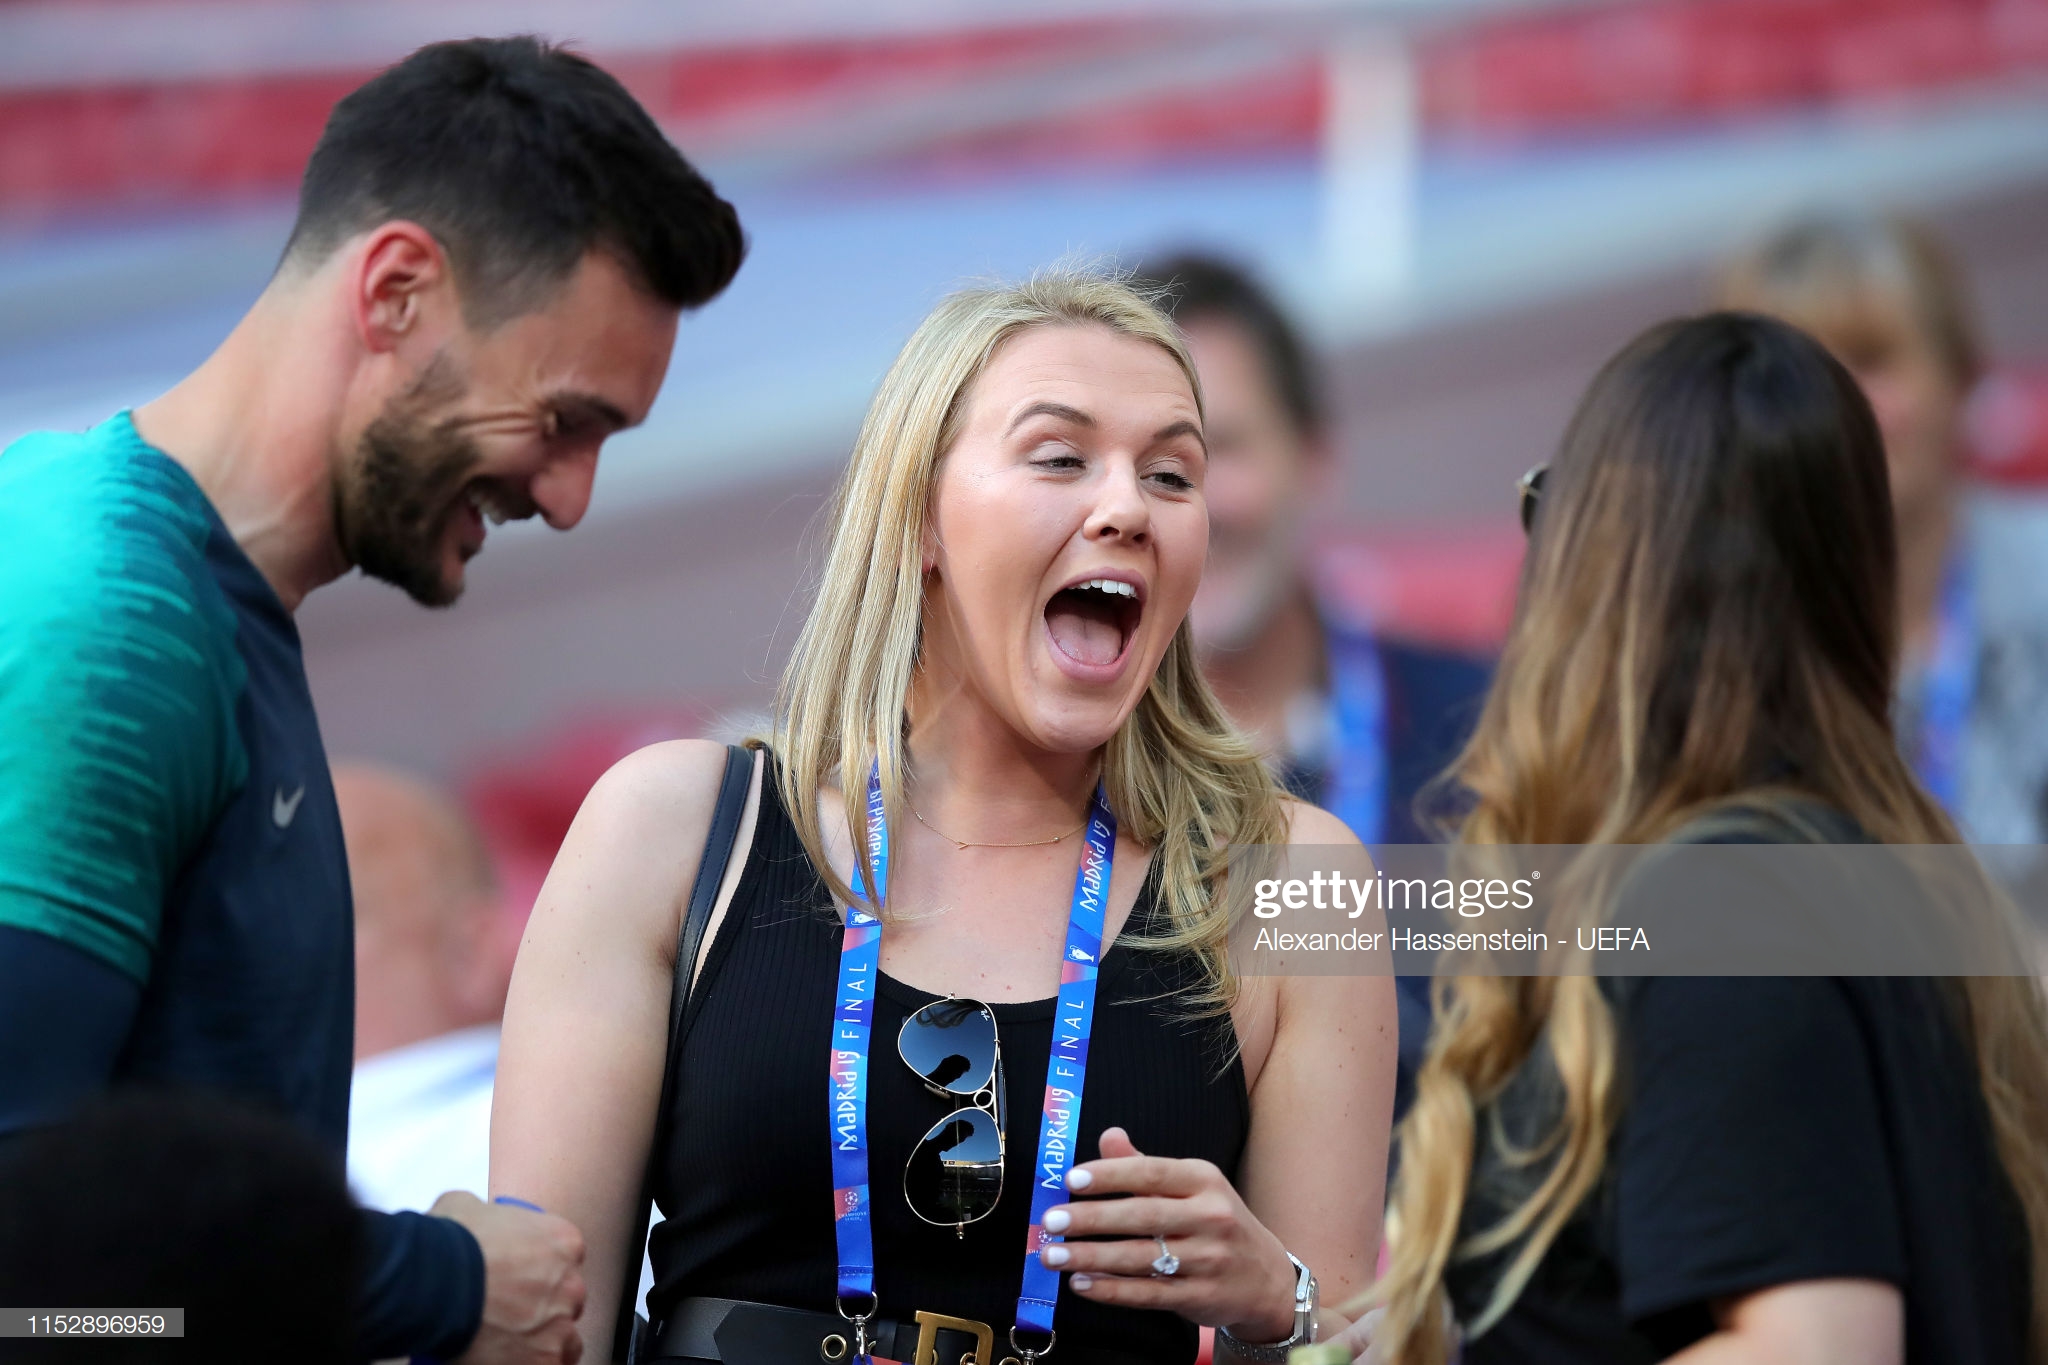 gettyimages-1152896959-2048x2048.jpg